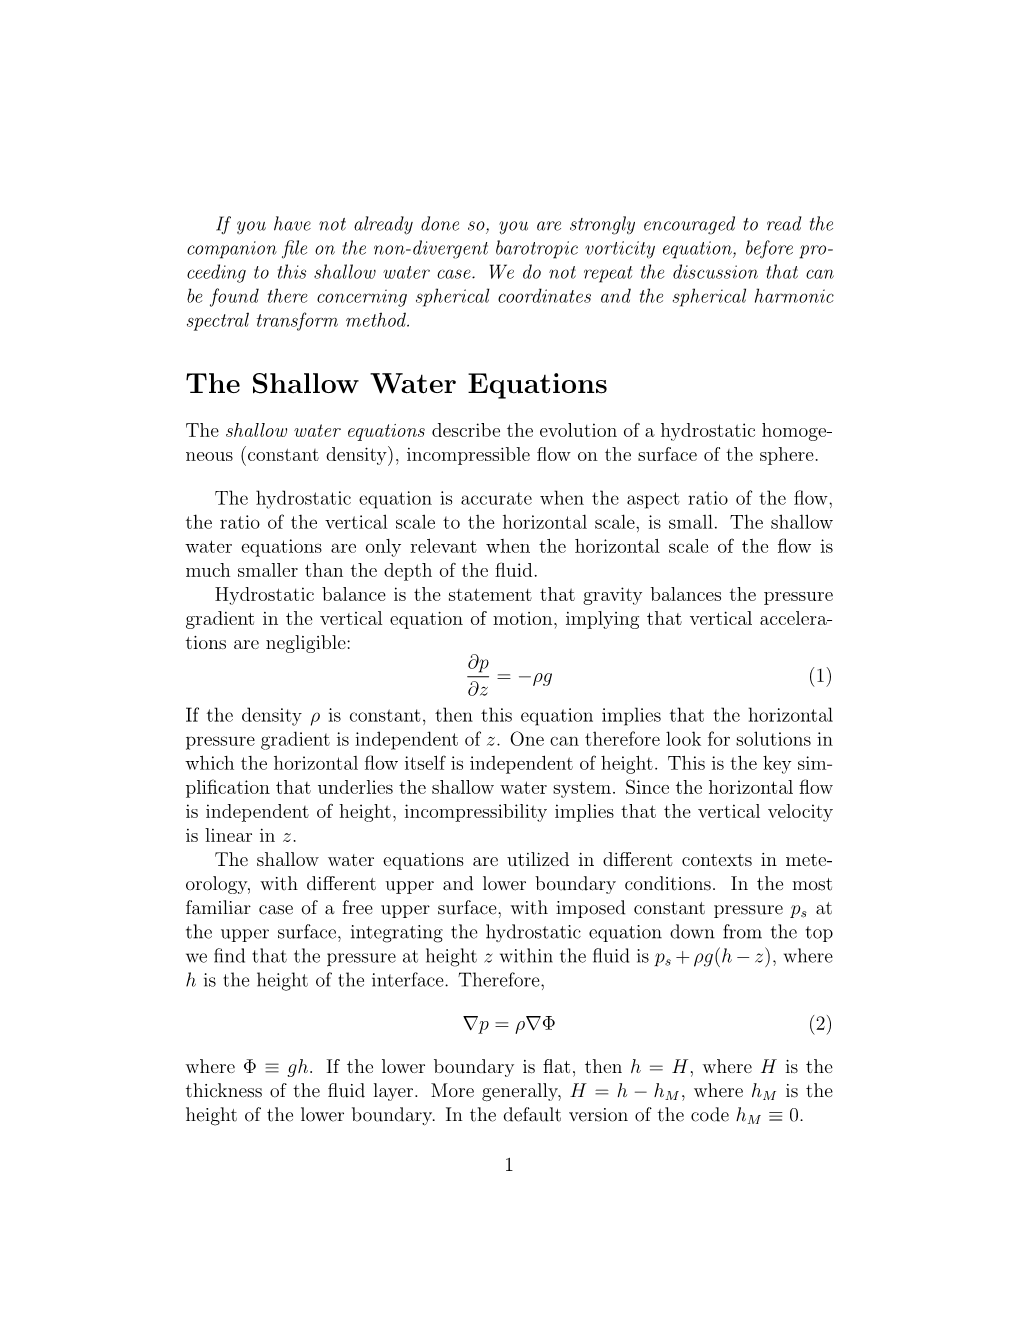 The Shallow Water Equations